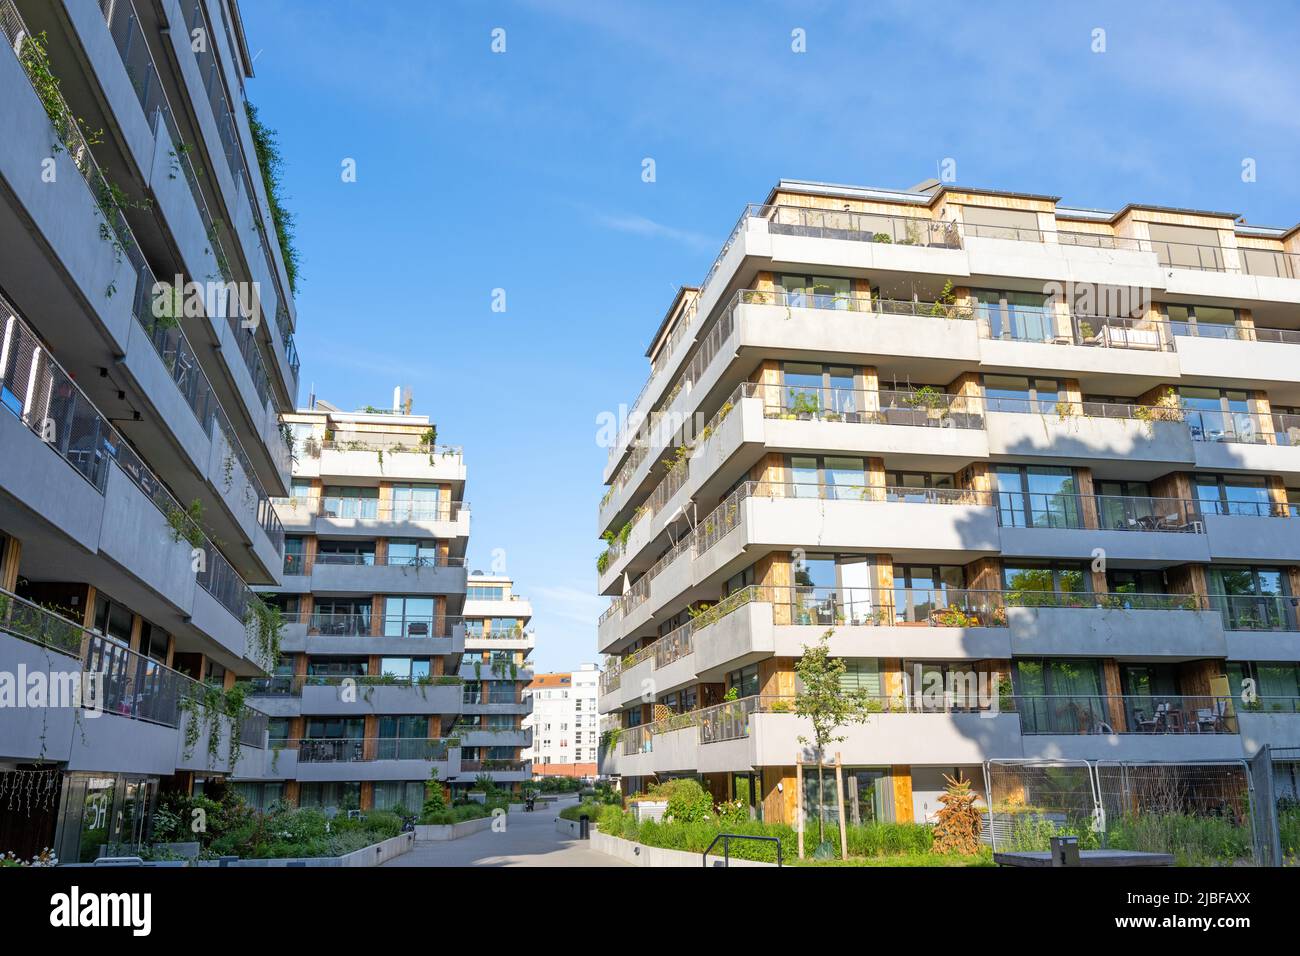 New apartment houses seen in Berlin, Germany Stock Photo